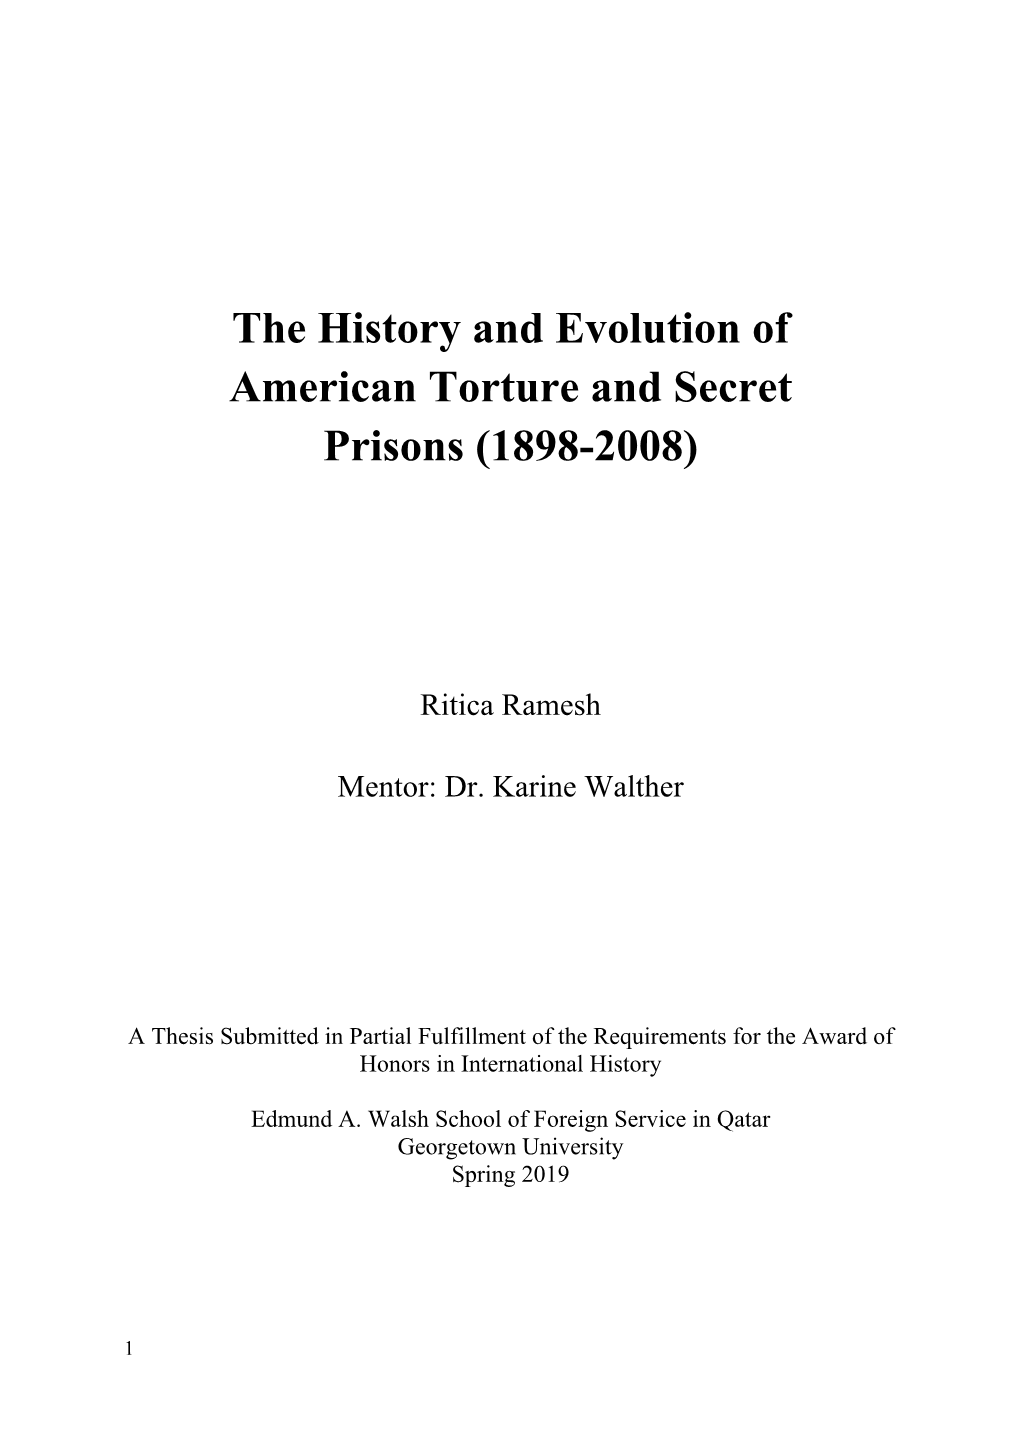 The History and Evolution of American Torture and Secret Prisons (1898-2008)